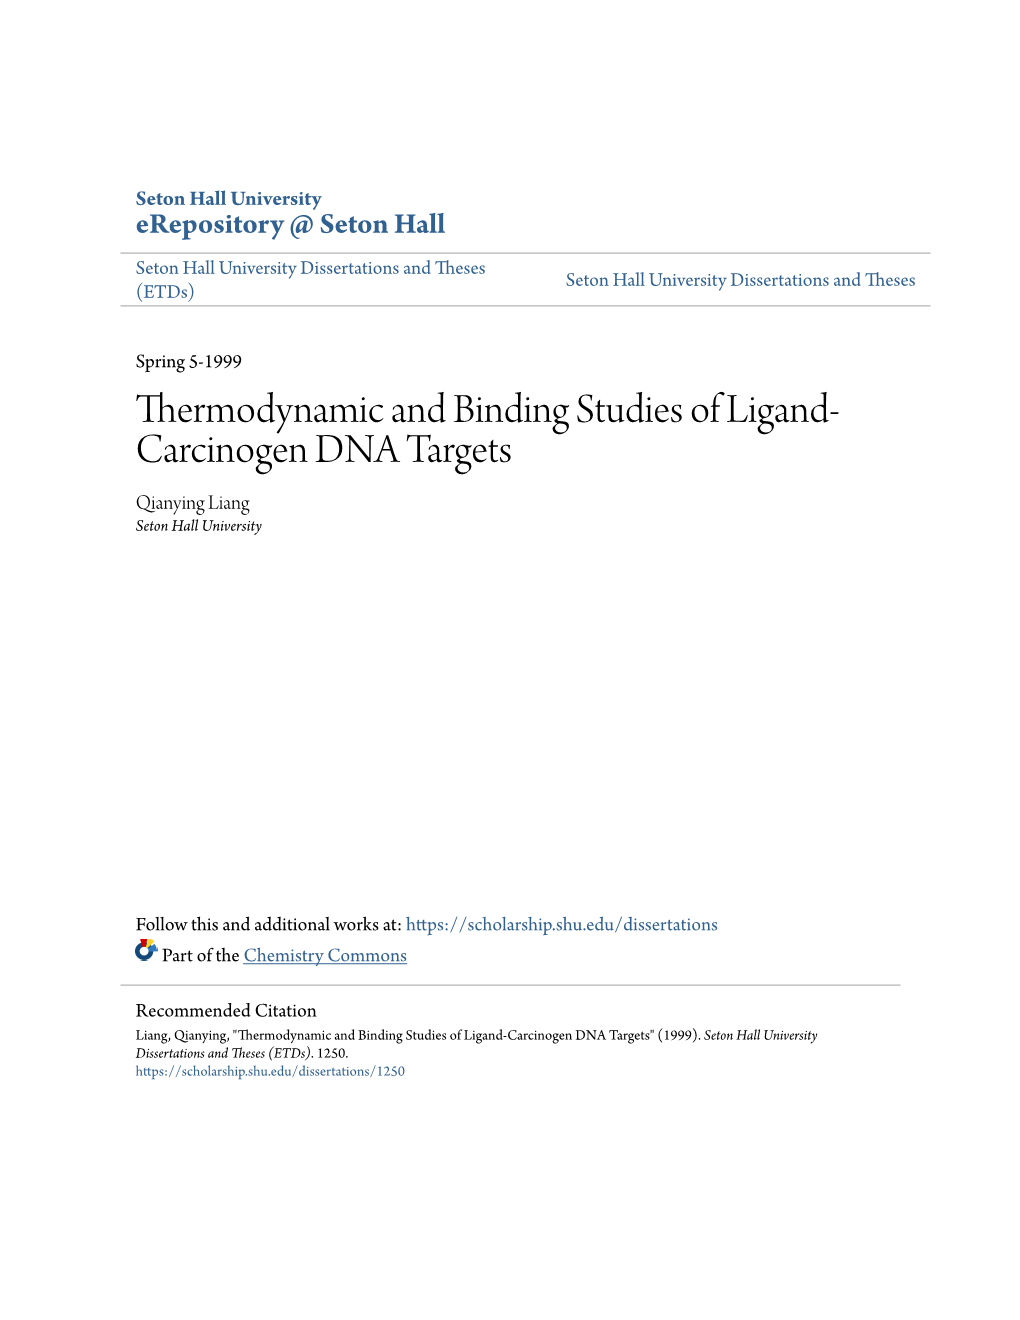 Thermodynamic and Binding Studies of Ligand-Carcinogen DNA Targets" (1999)